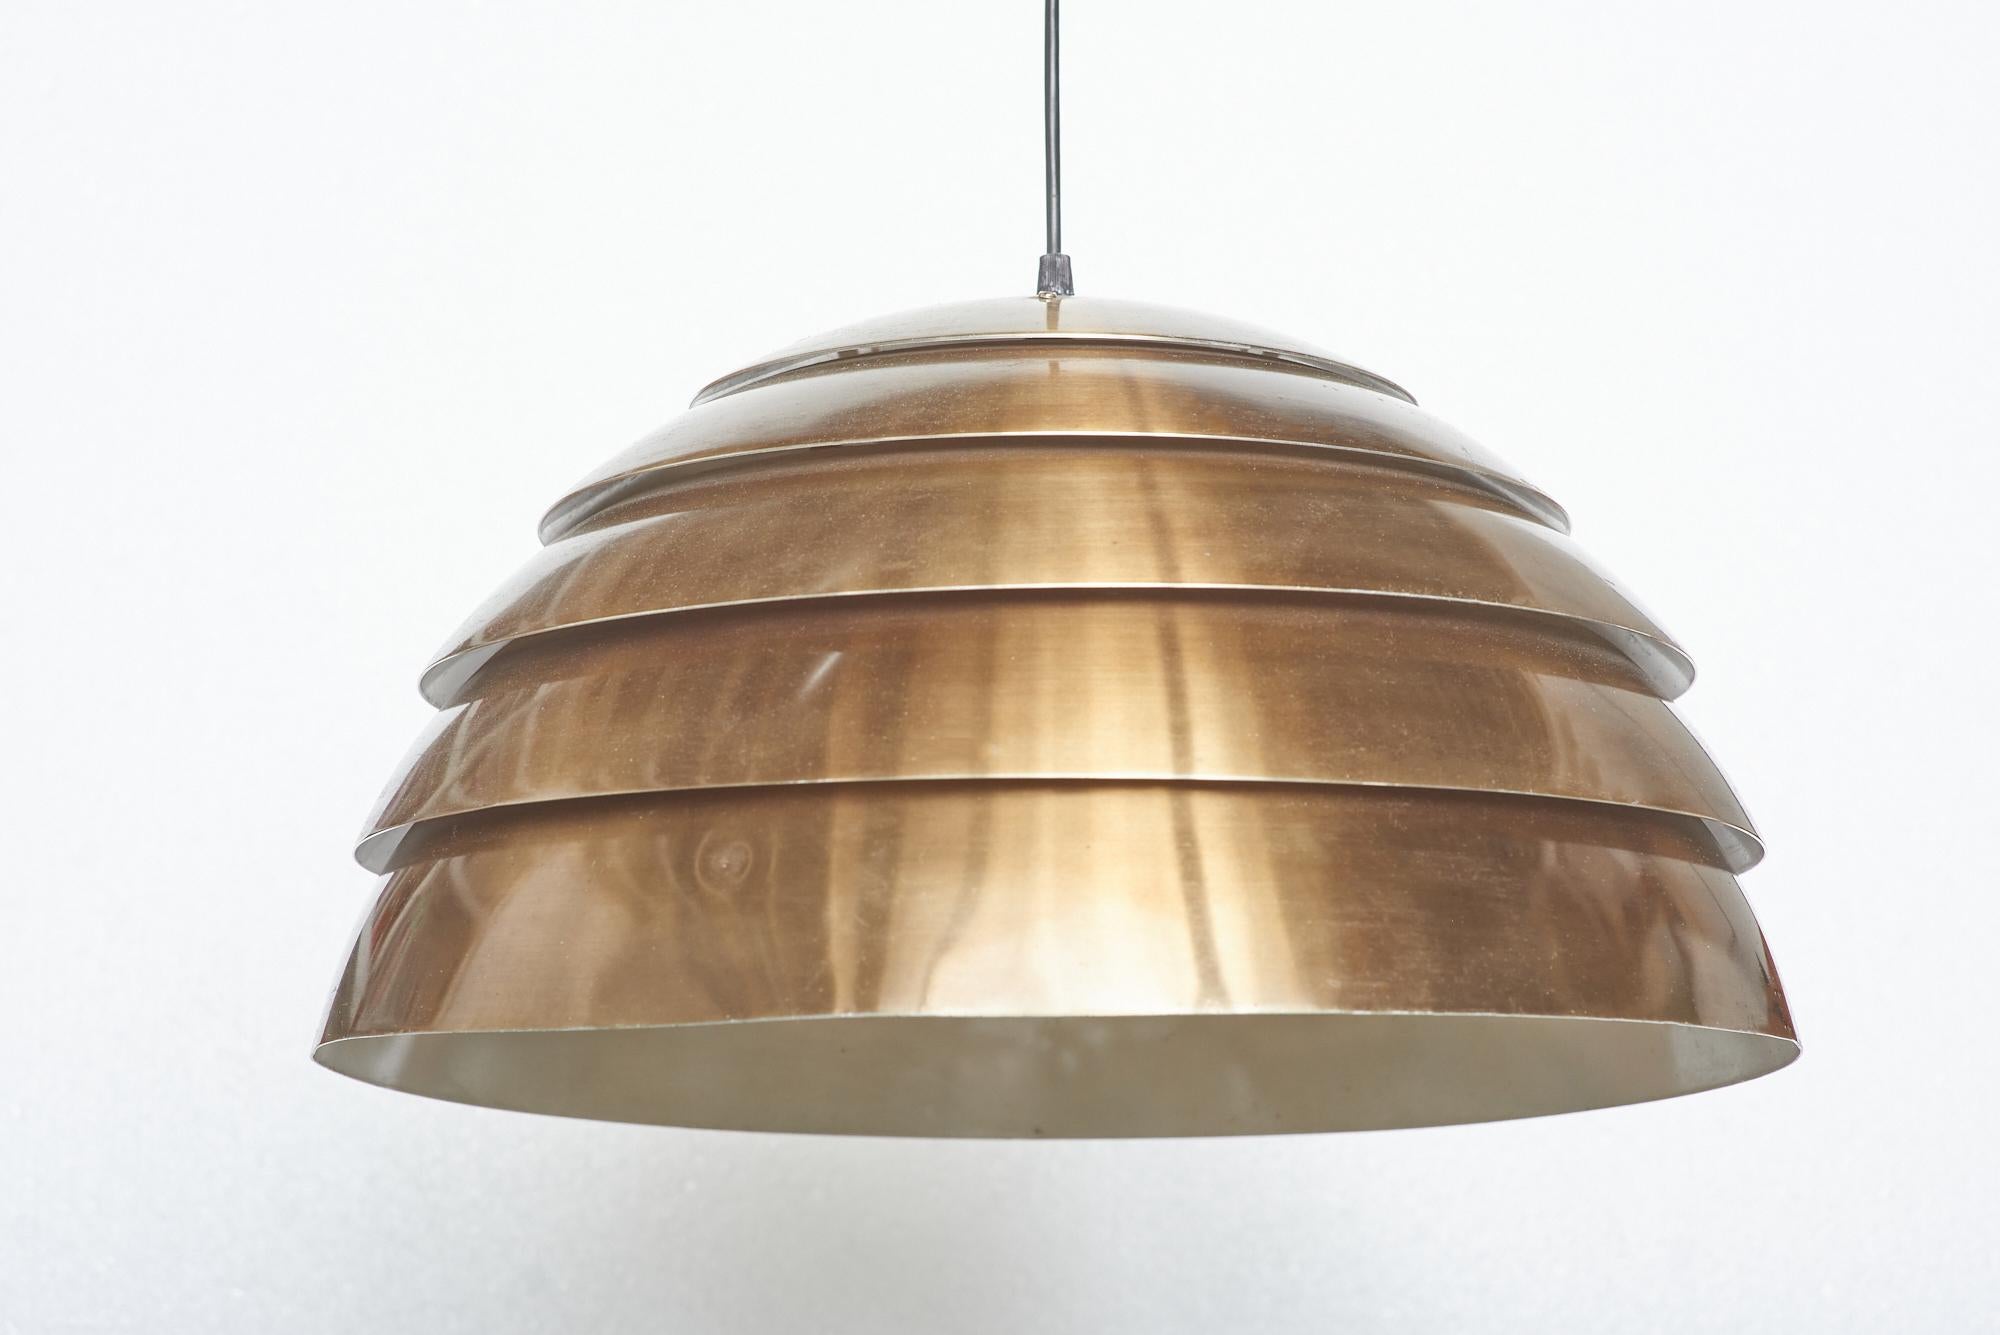 1960s beehive pendant lamp by Hans-Agne Jakobsson for Hans-Agne Jakobsson AB in Markeryd, Sweden (325/400 edition).